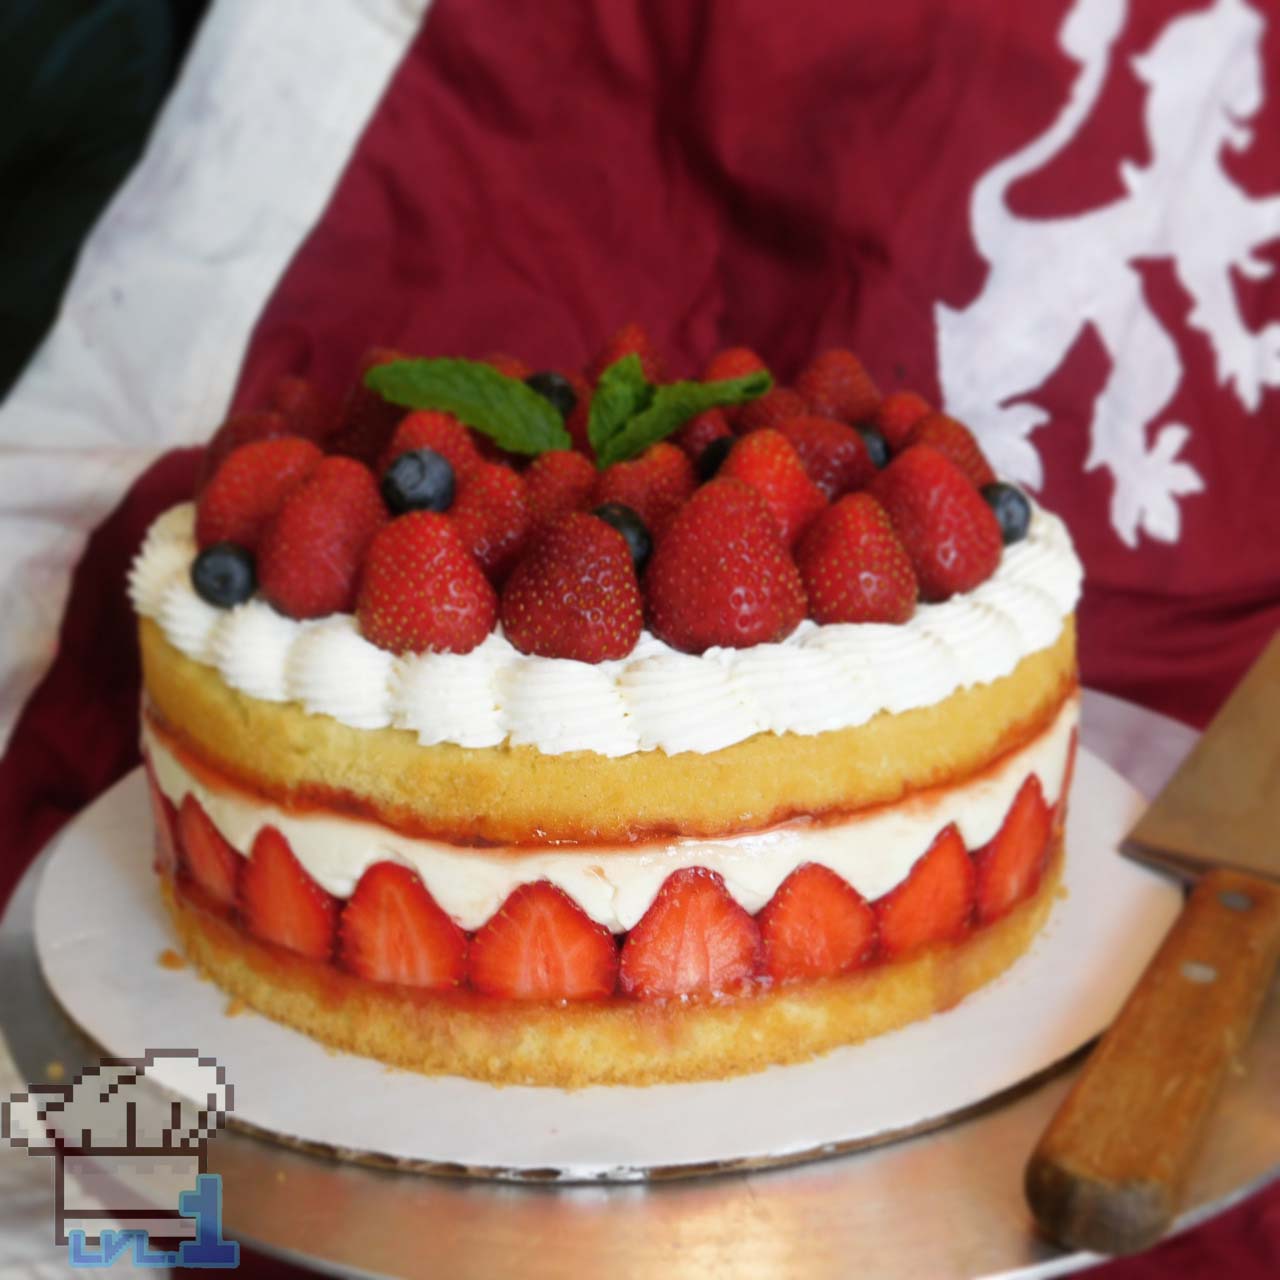 Completed strawberry frasier cake recipe from the Bravely Second End Layer game series.